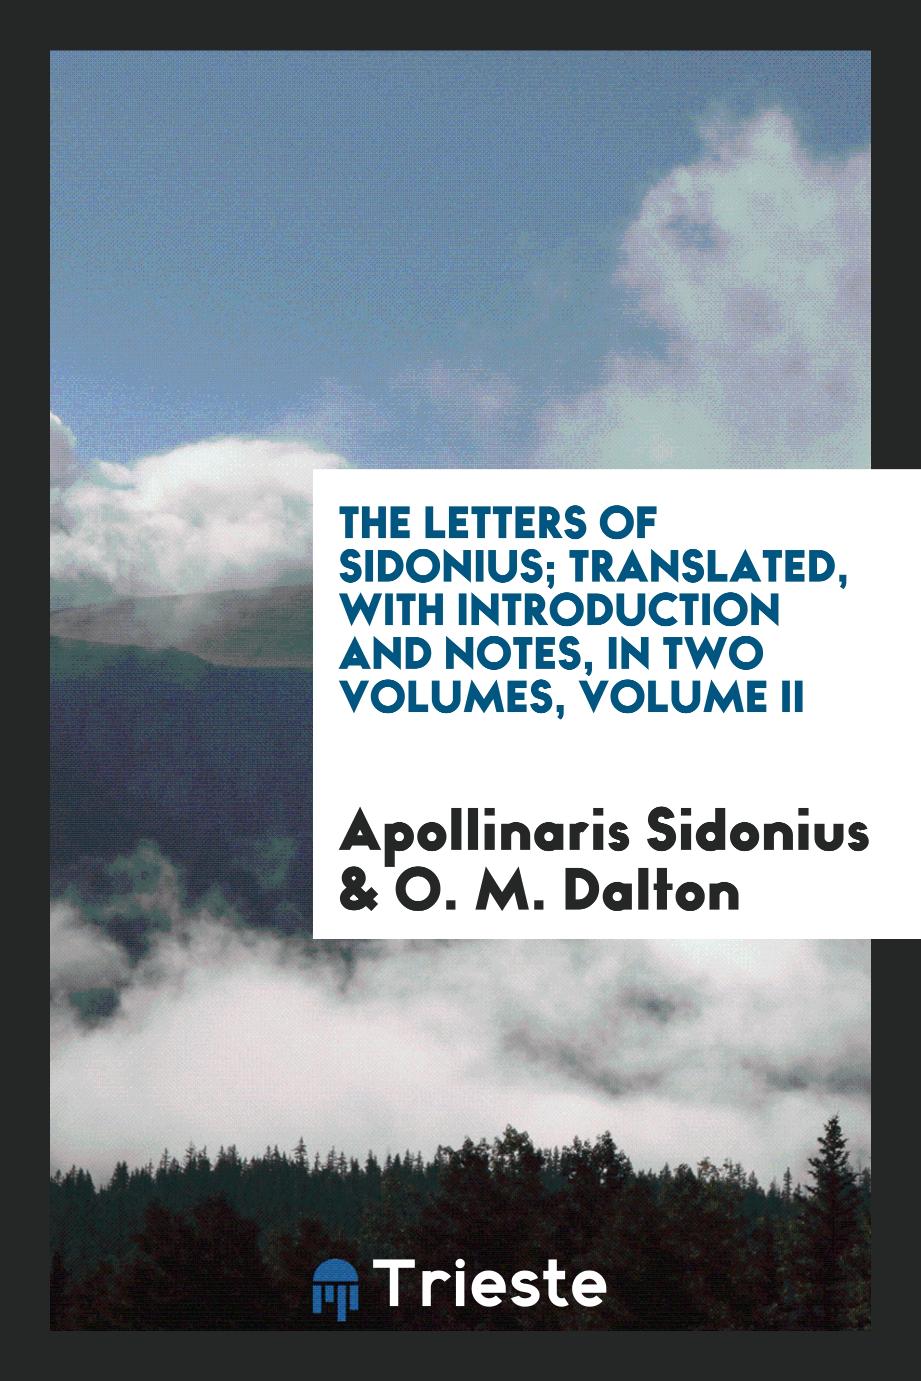 The letters of Sidonius; Translated, with introduction and notes, In two Volumes, Volume II